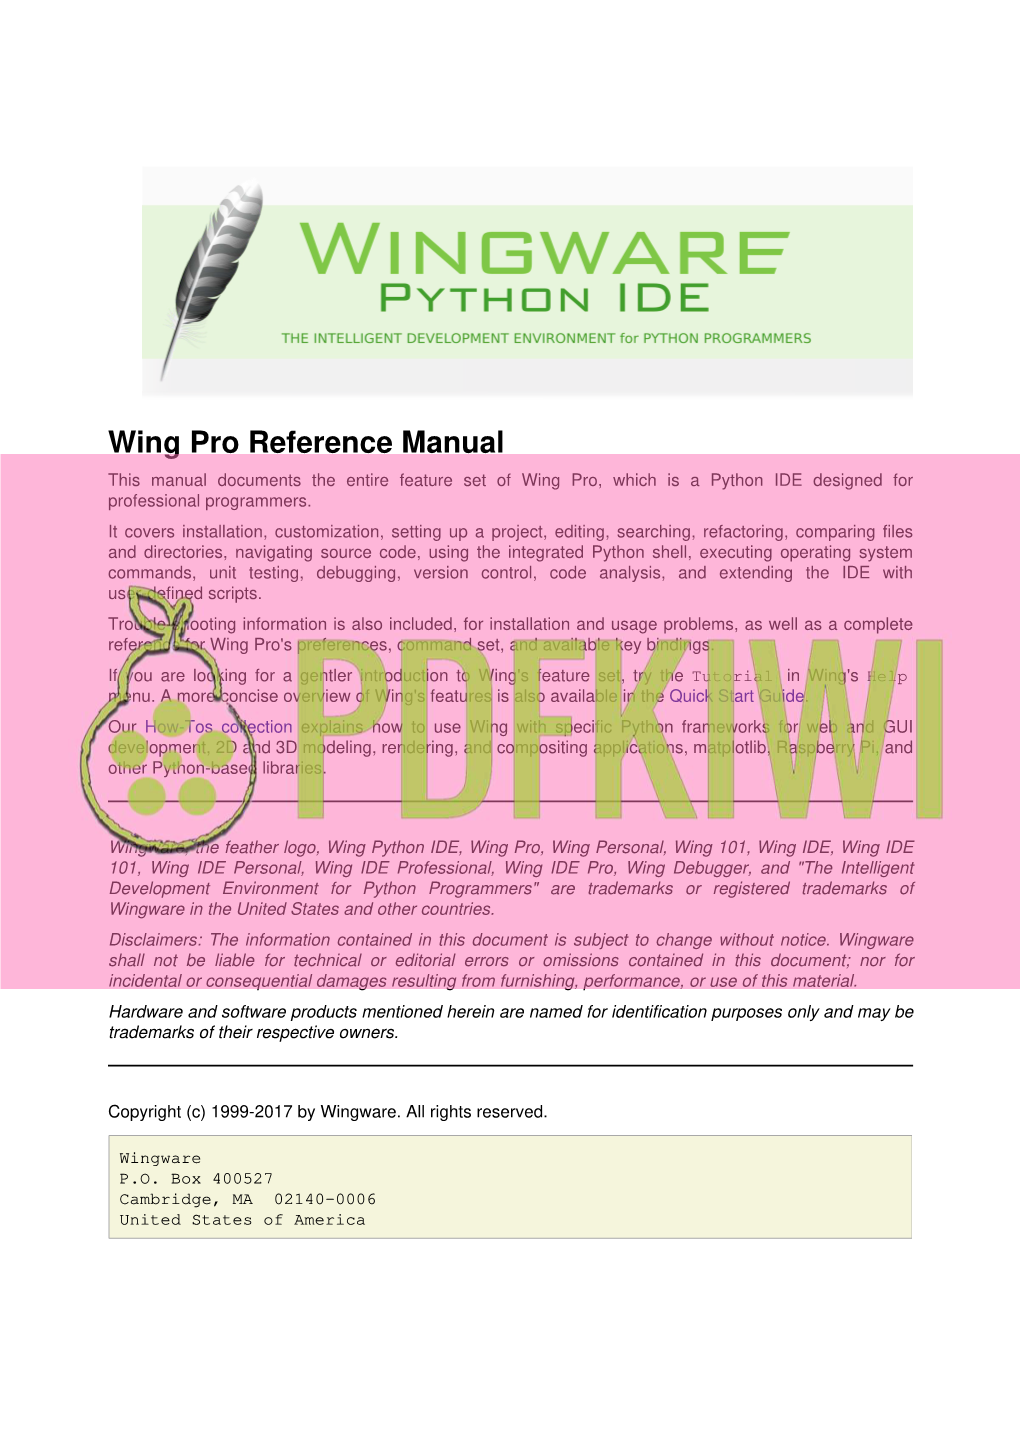 Wing Pro Reference Manual This Manual Documents the Entire Feature Set of Wing Pro, Which Is a Python IDE Designed for Professional Programmers